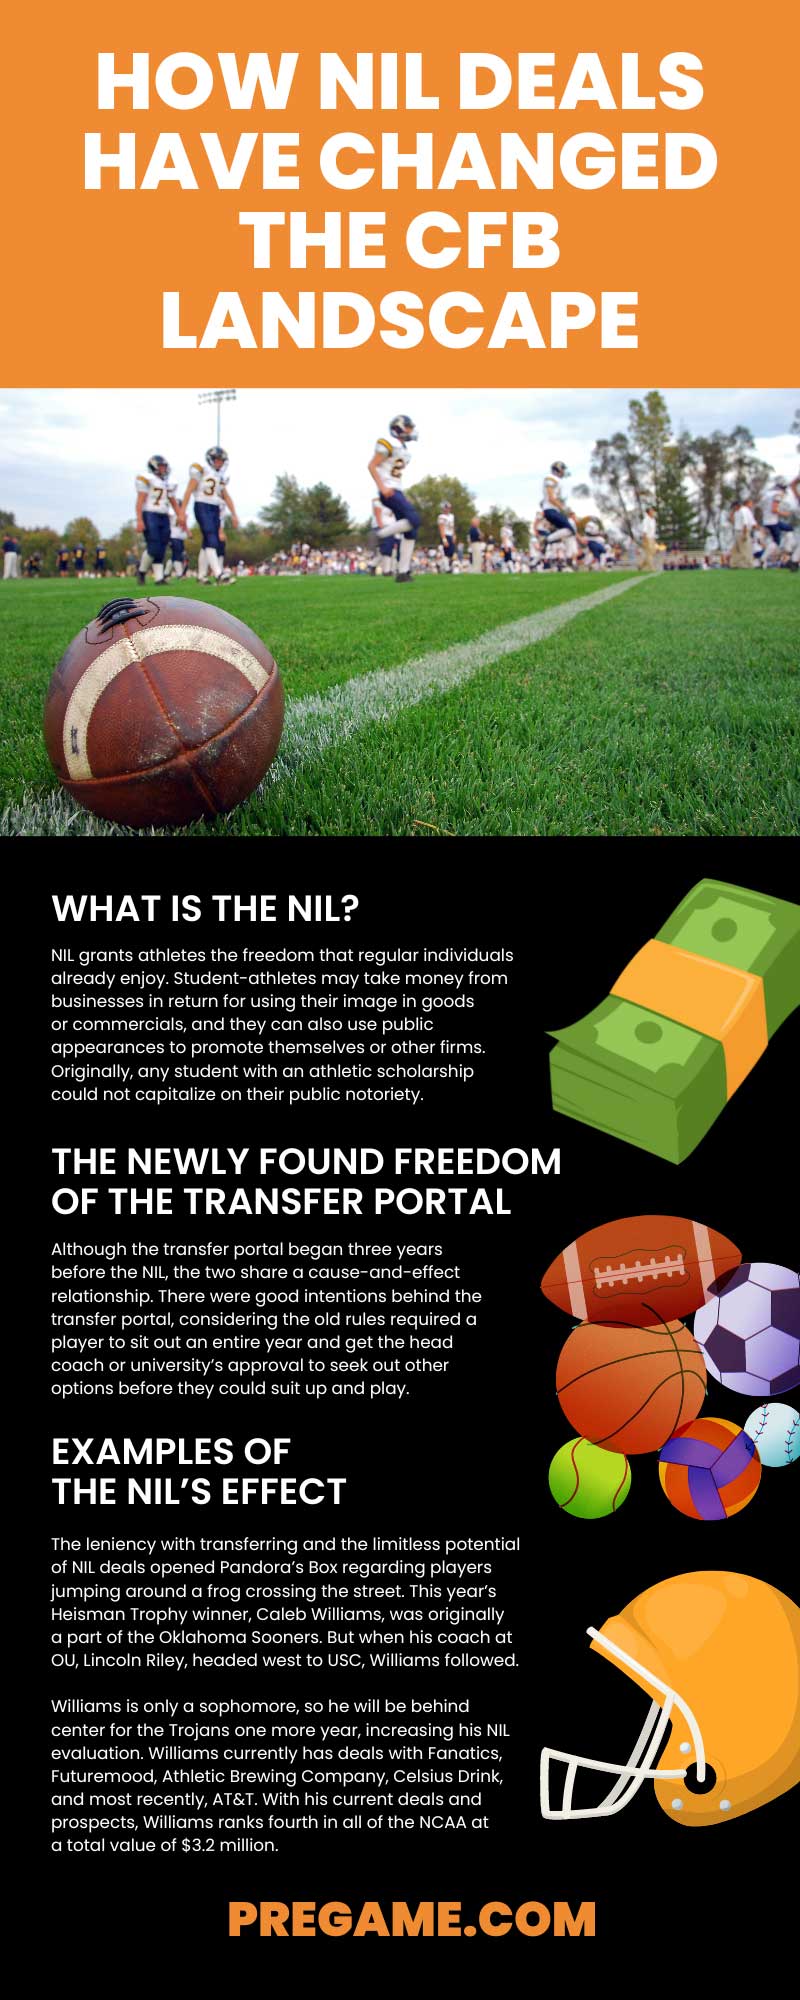 How NIL Deals Have Changed the CFB Landscape